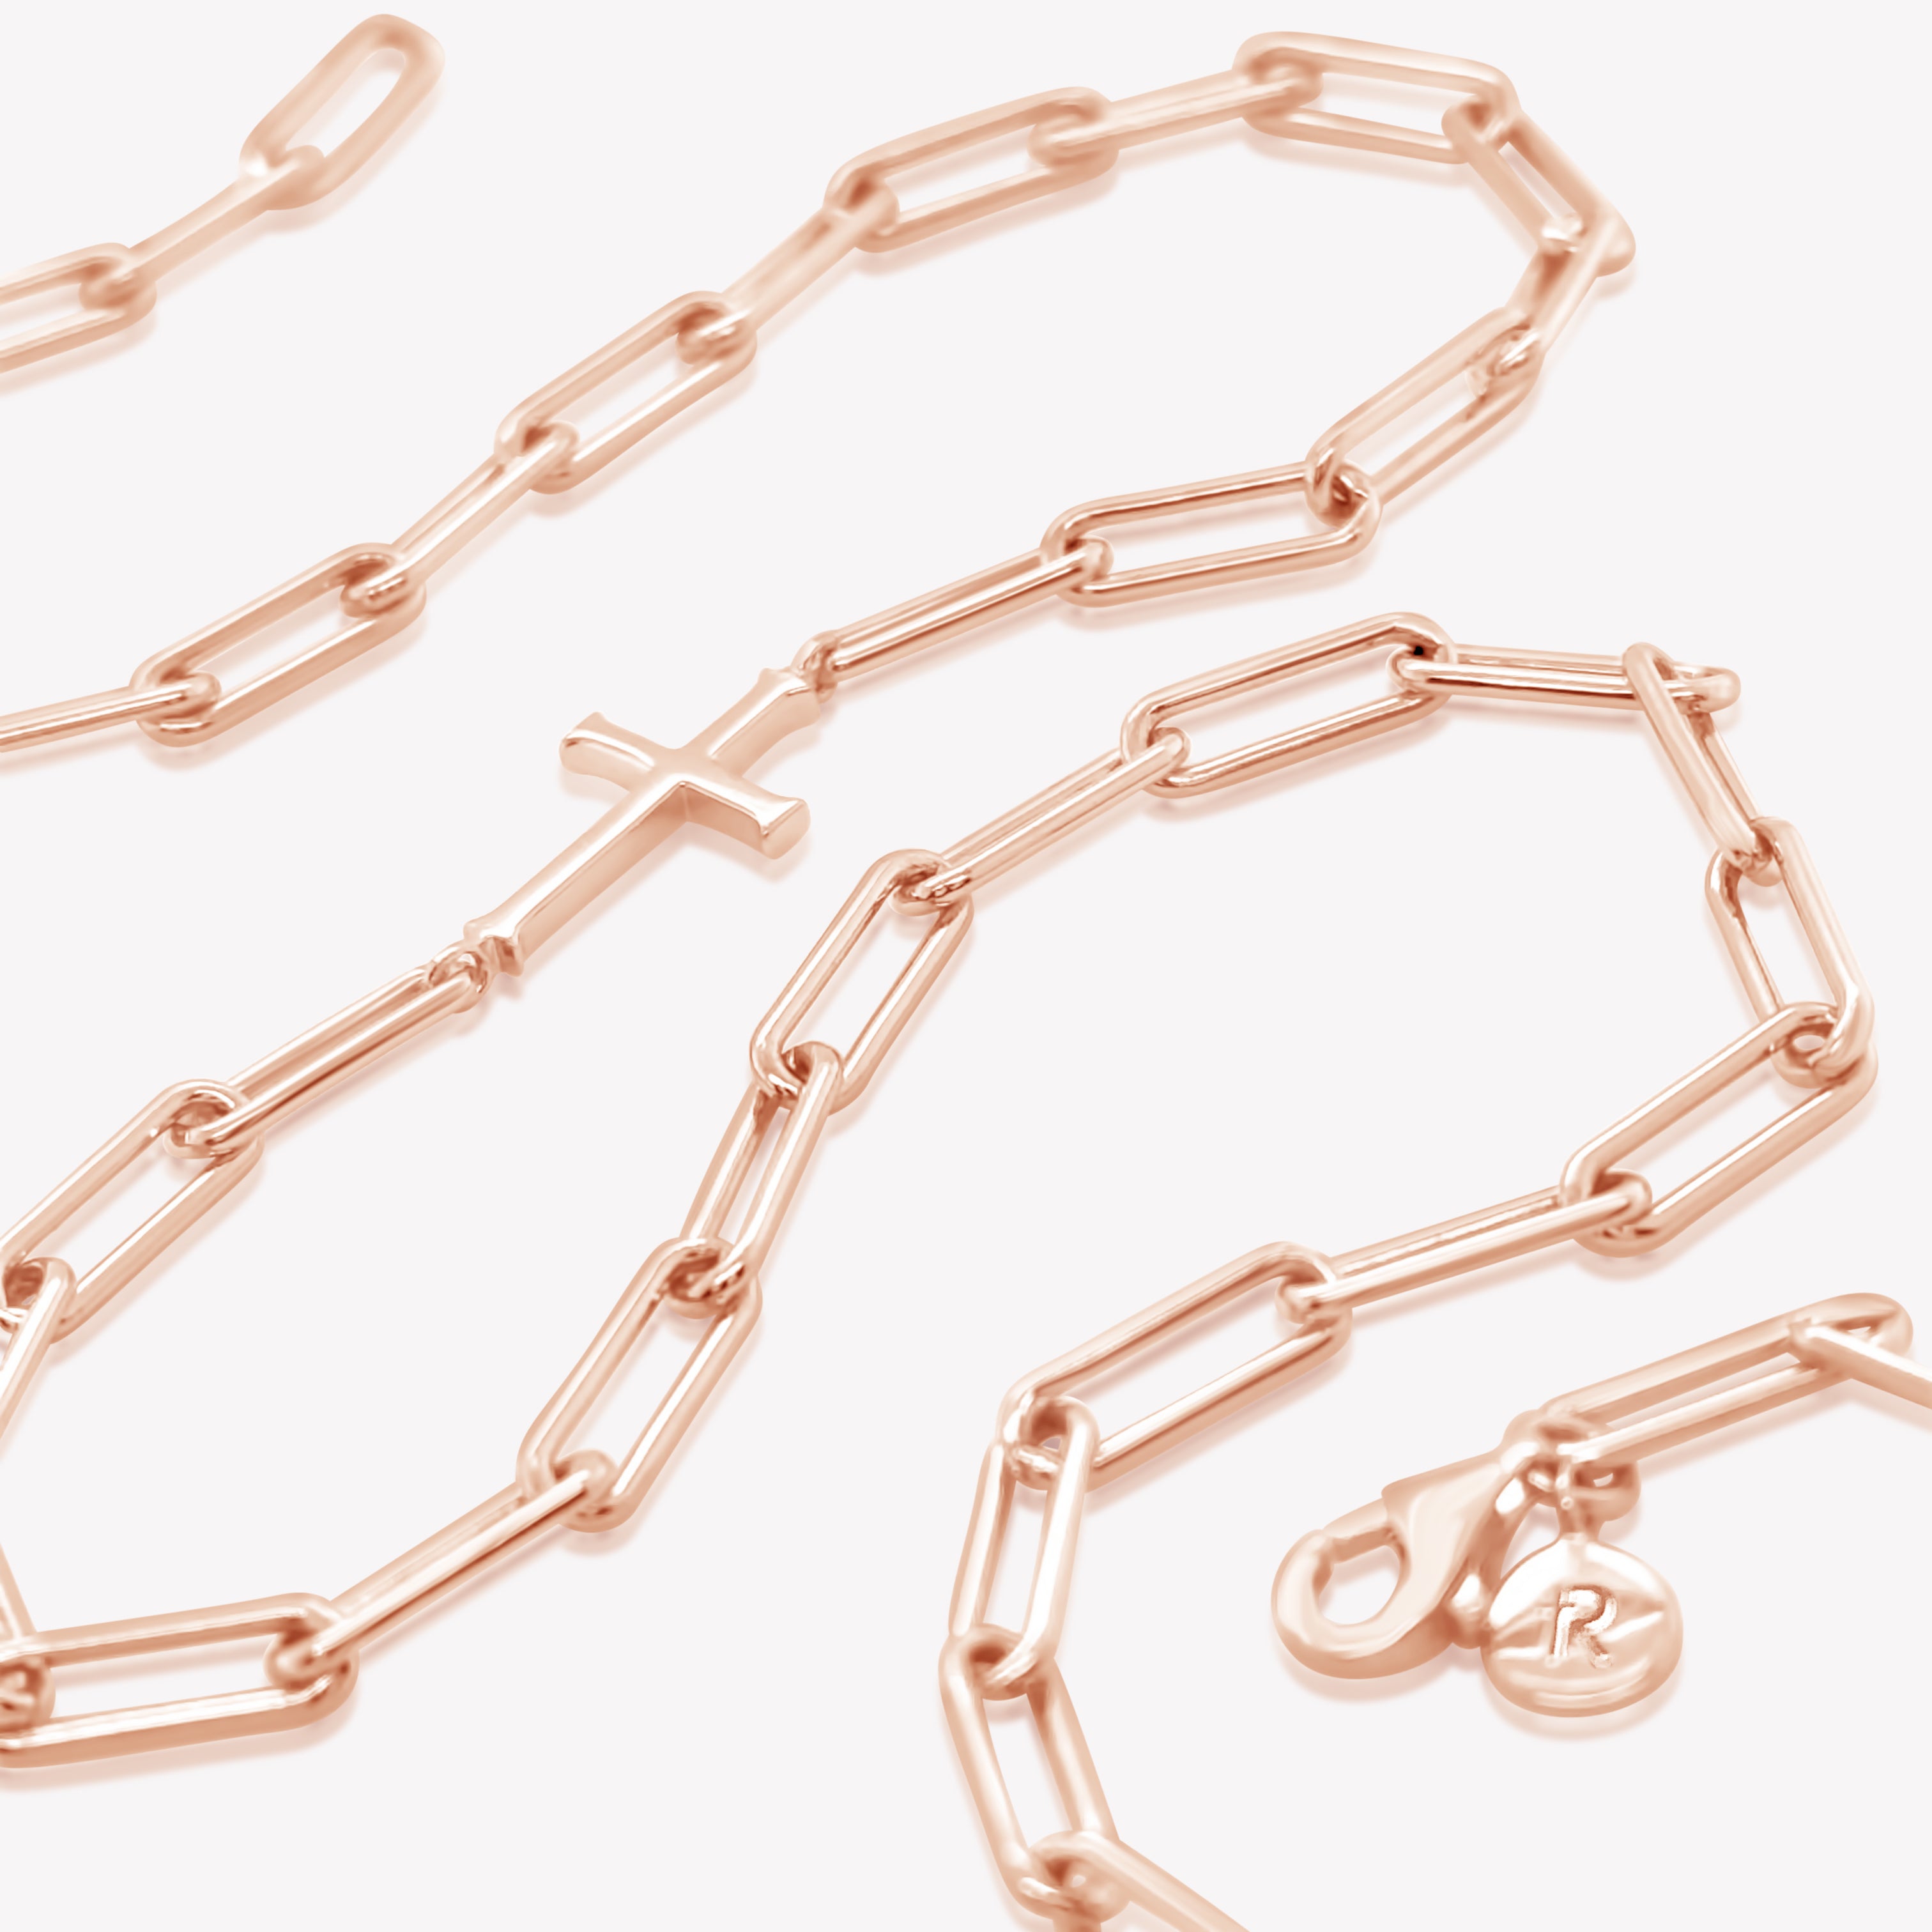 Rizen Jewelry Chain Breaker necklace in 18kt rose gold.  Elegant Cross Pendant breaks up the paper clip link chain with classic lobster clasp  closure.